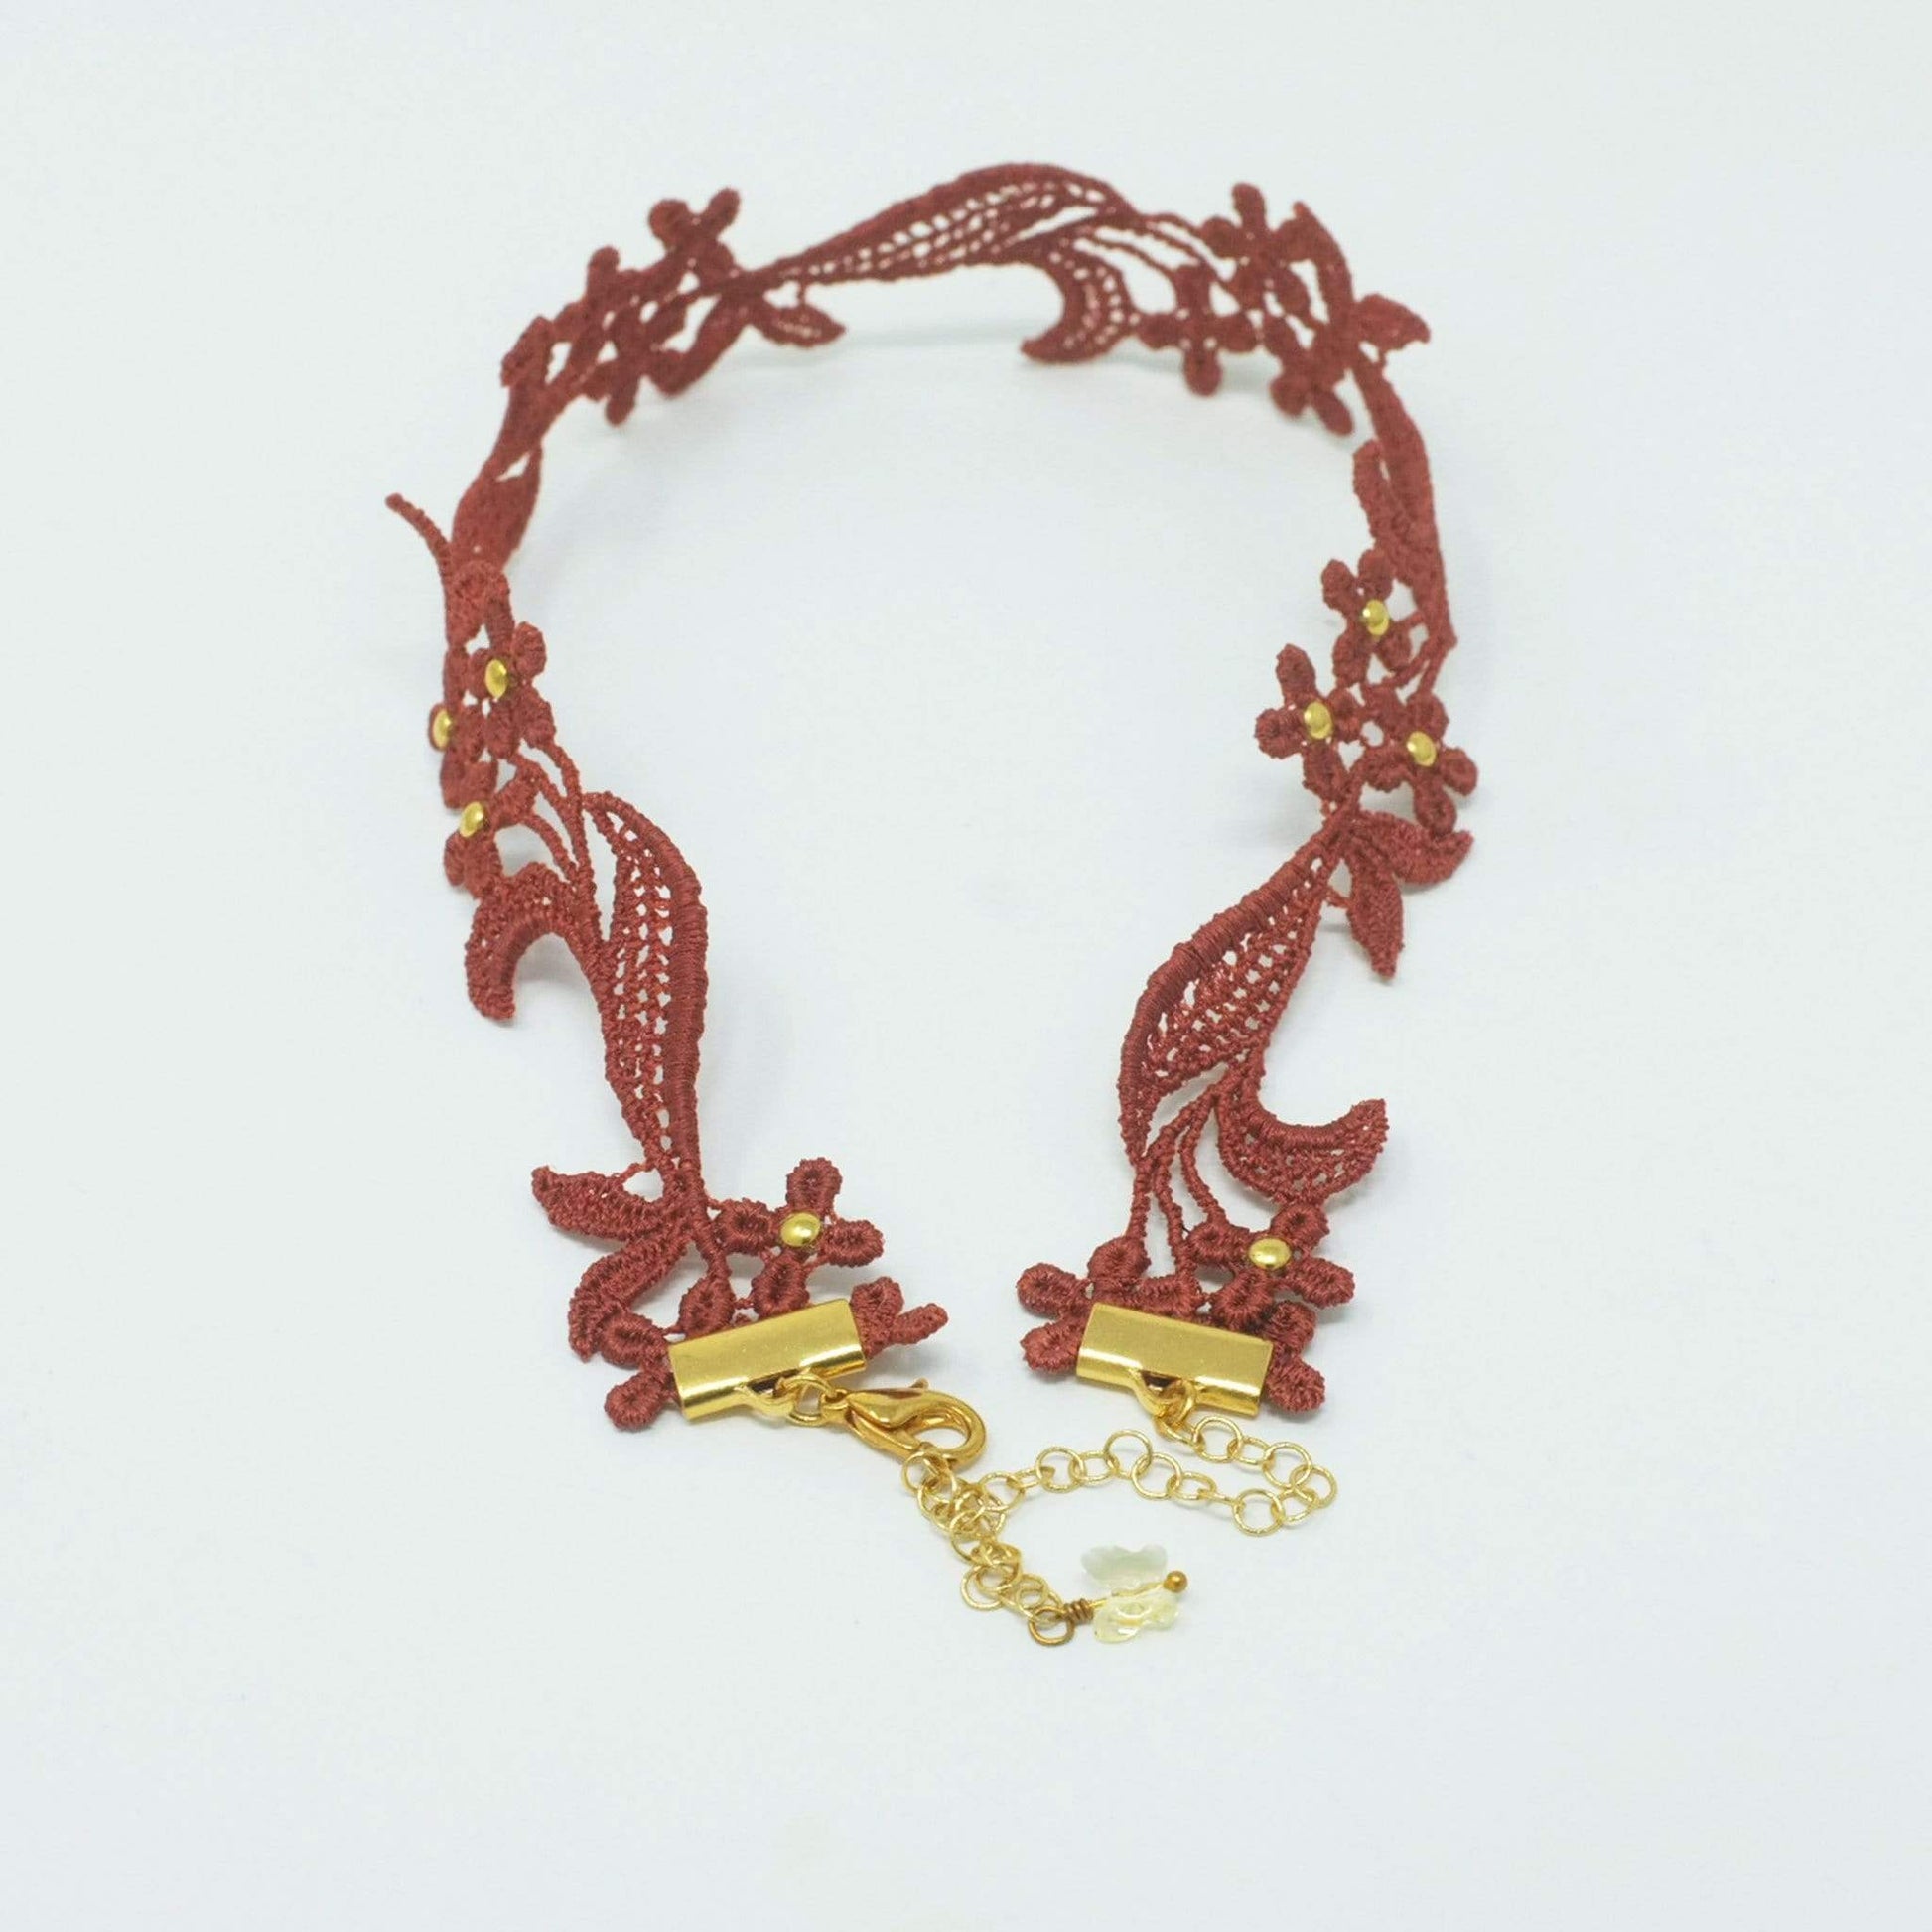 Burnt-Orange Floral Lace Necklace with Gold Clasps